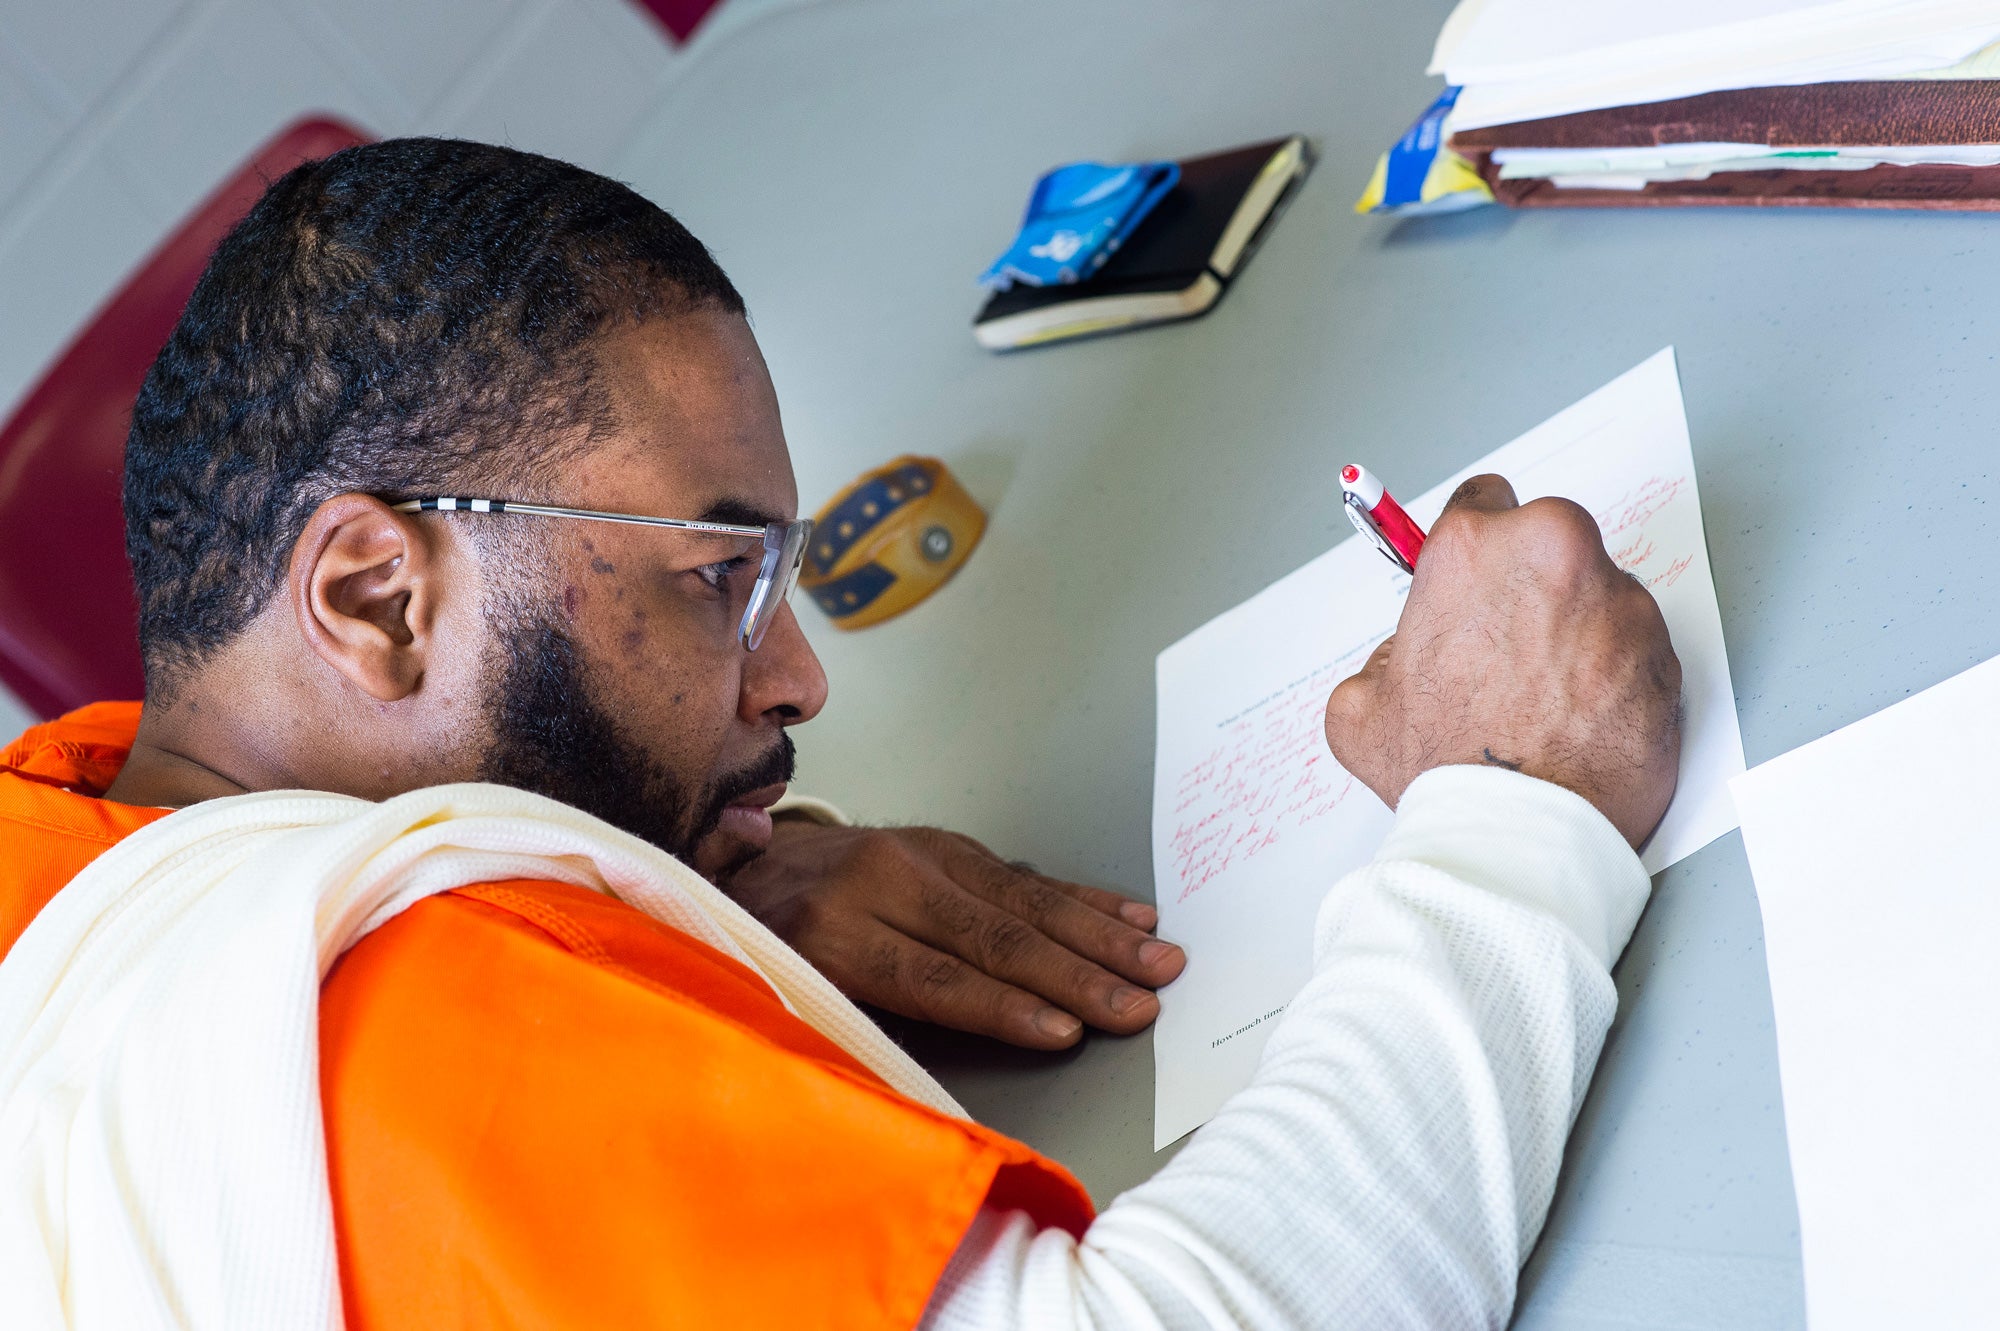 An incarcerated man works on an assignment